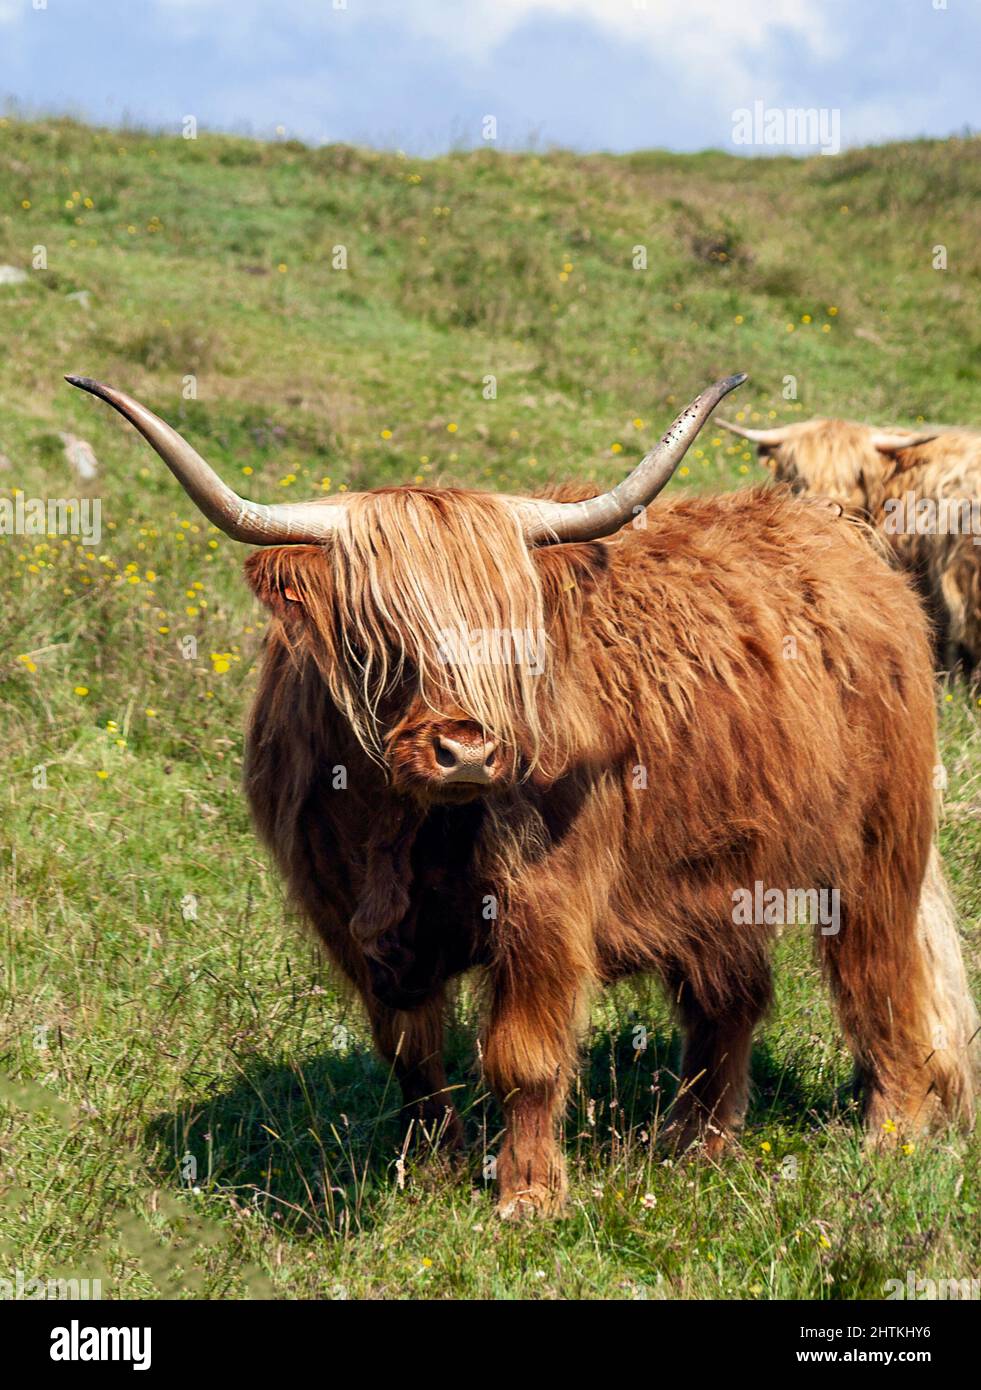 Long horned highland cattle grazing in field overlooking the sea on the Isle of Mull, Inner Hebrides, Scottish Highlands, Scotland, UK, Europe Stock Photo